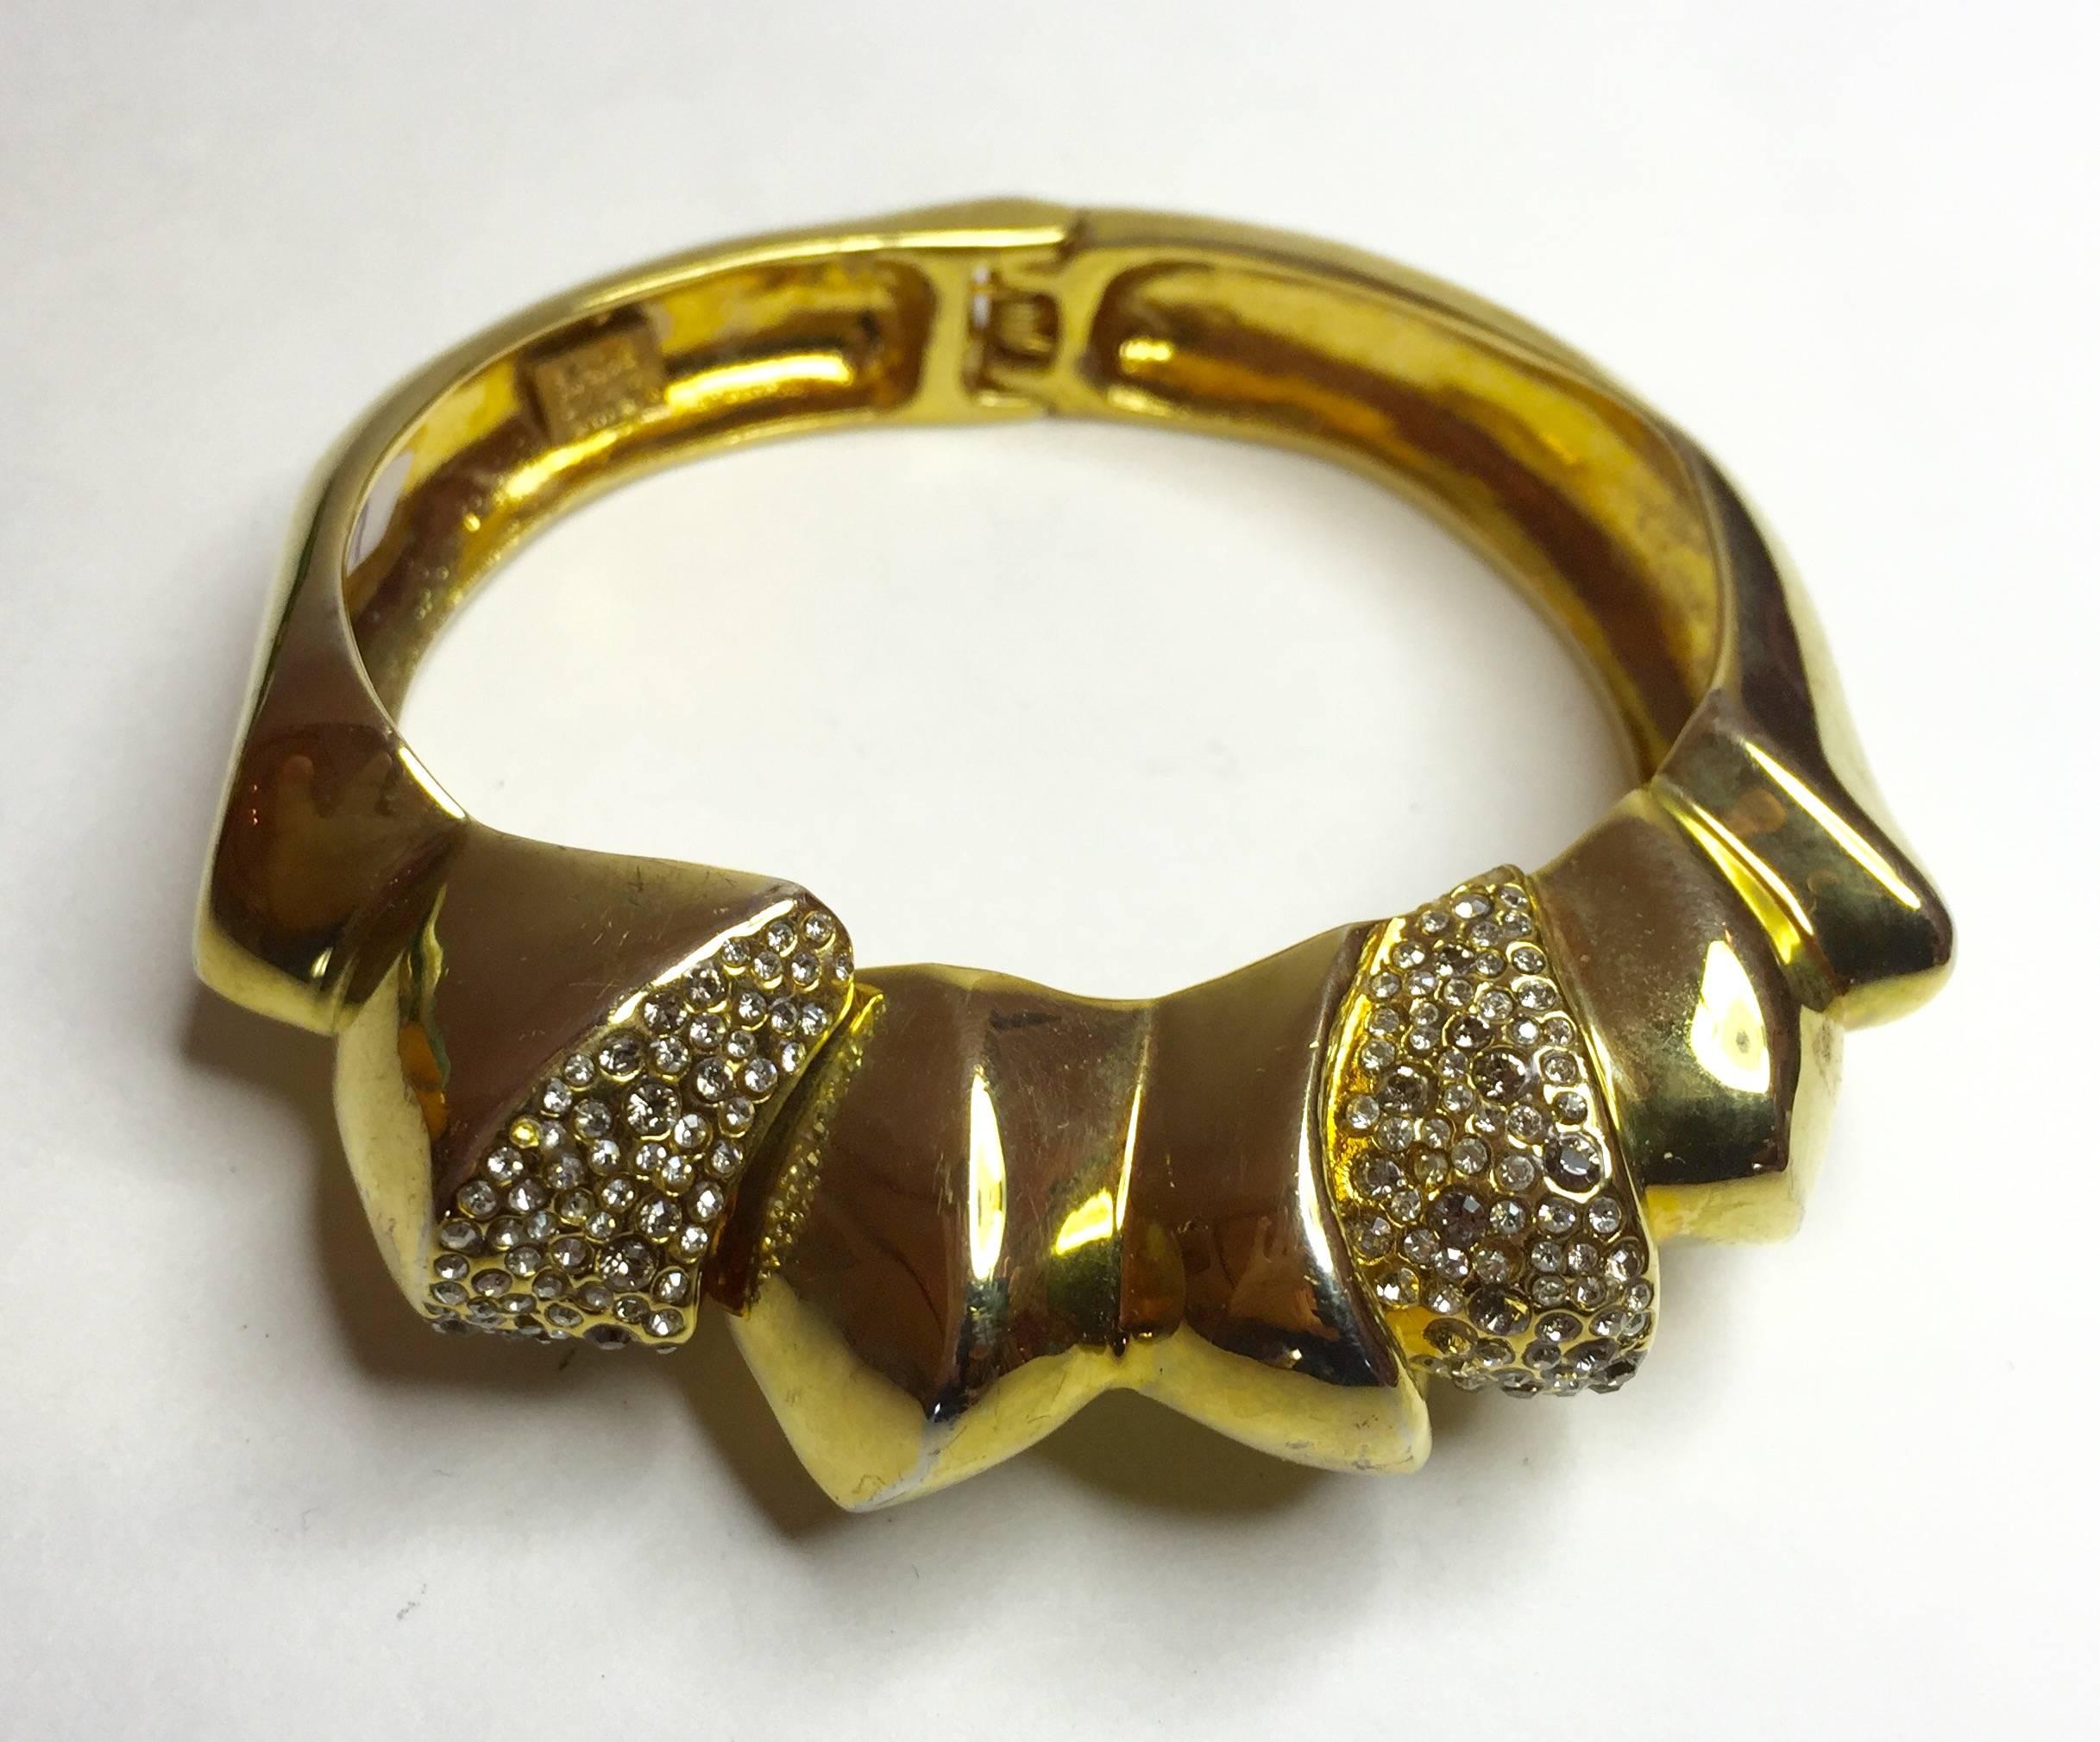 21st Century Alexis Bittar Unusual Goldtone Hinged Bracelet In Excellent Condition For Sale In Palm Springs, CA